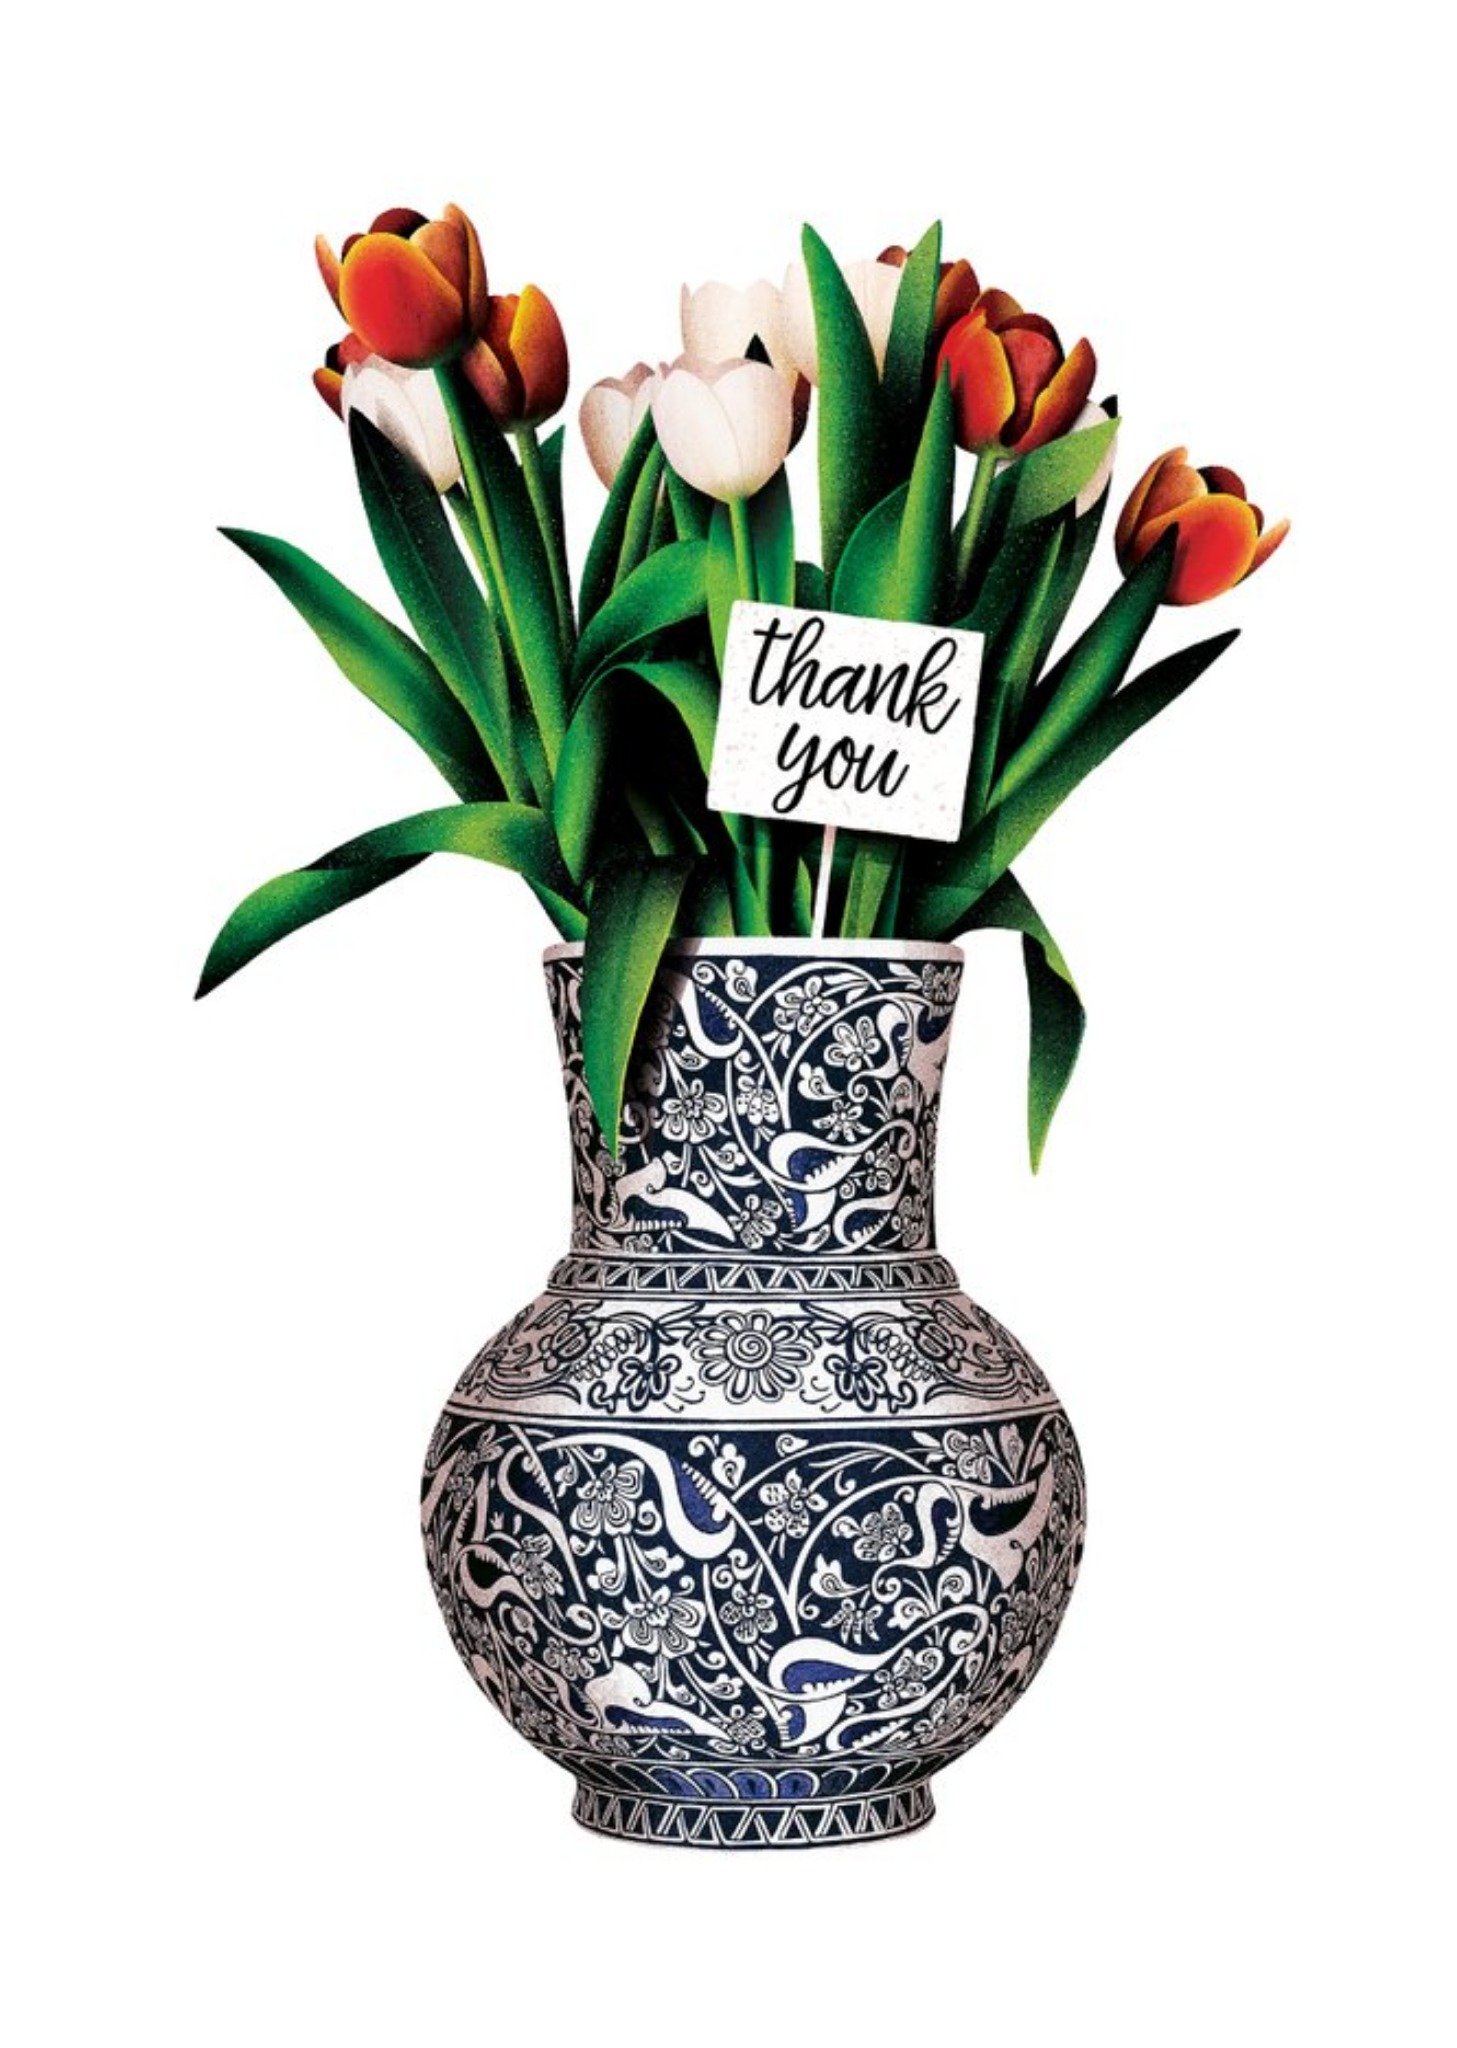 Moonpig Folio Illustrated Vase With Tulips And A Thank You Note, Large Card